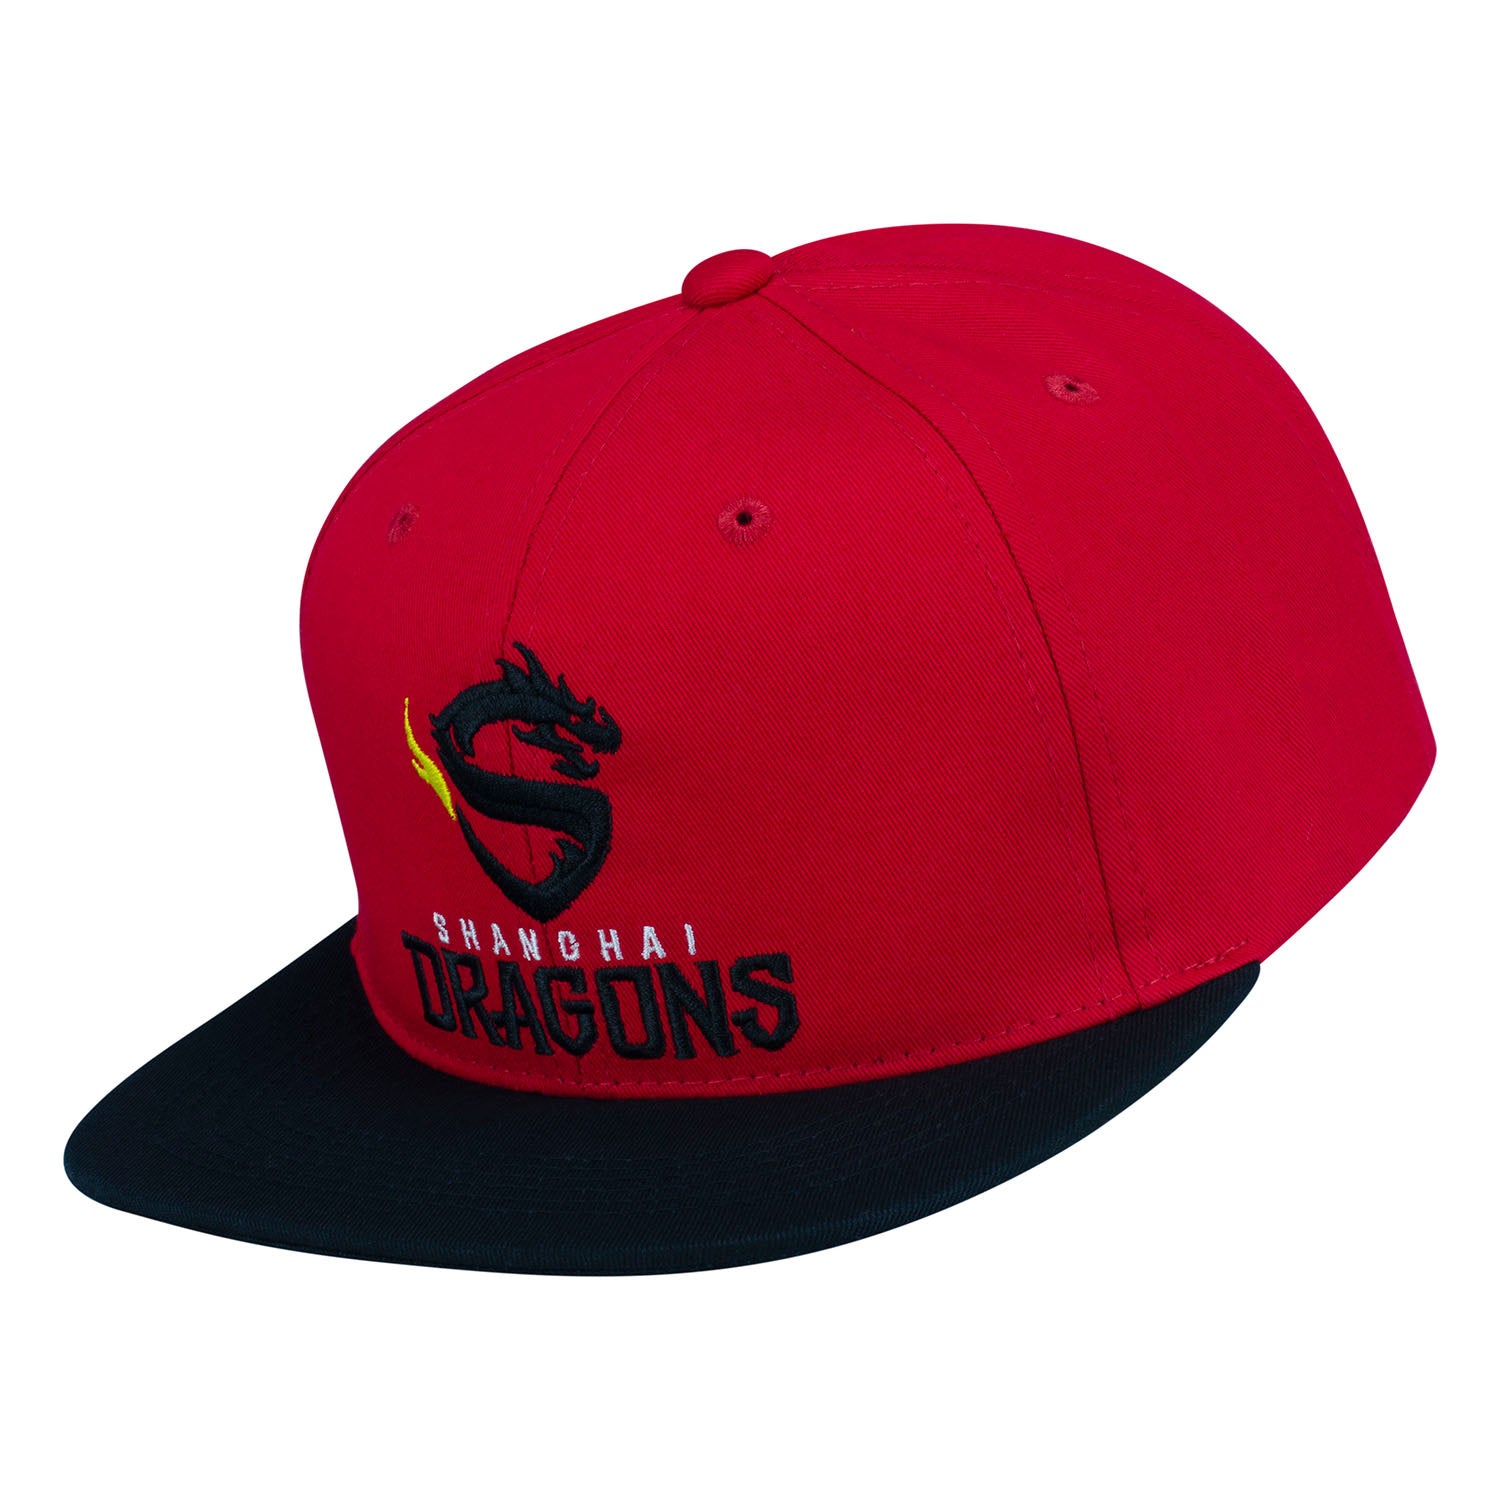 Shanghai Dragons Red Snapback Hat - Left View